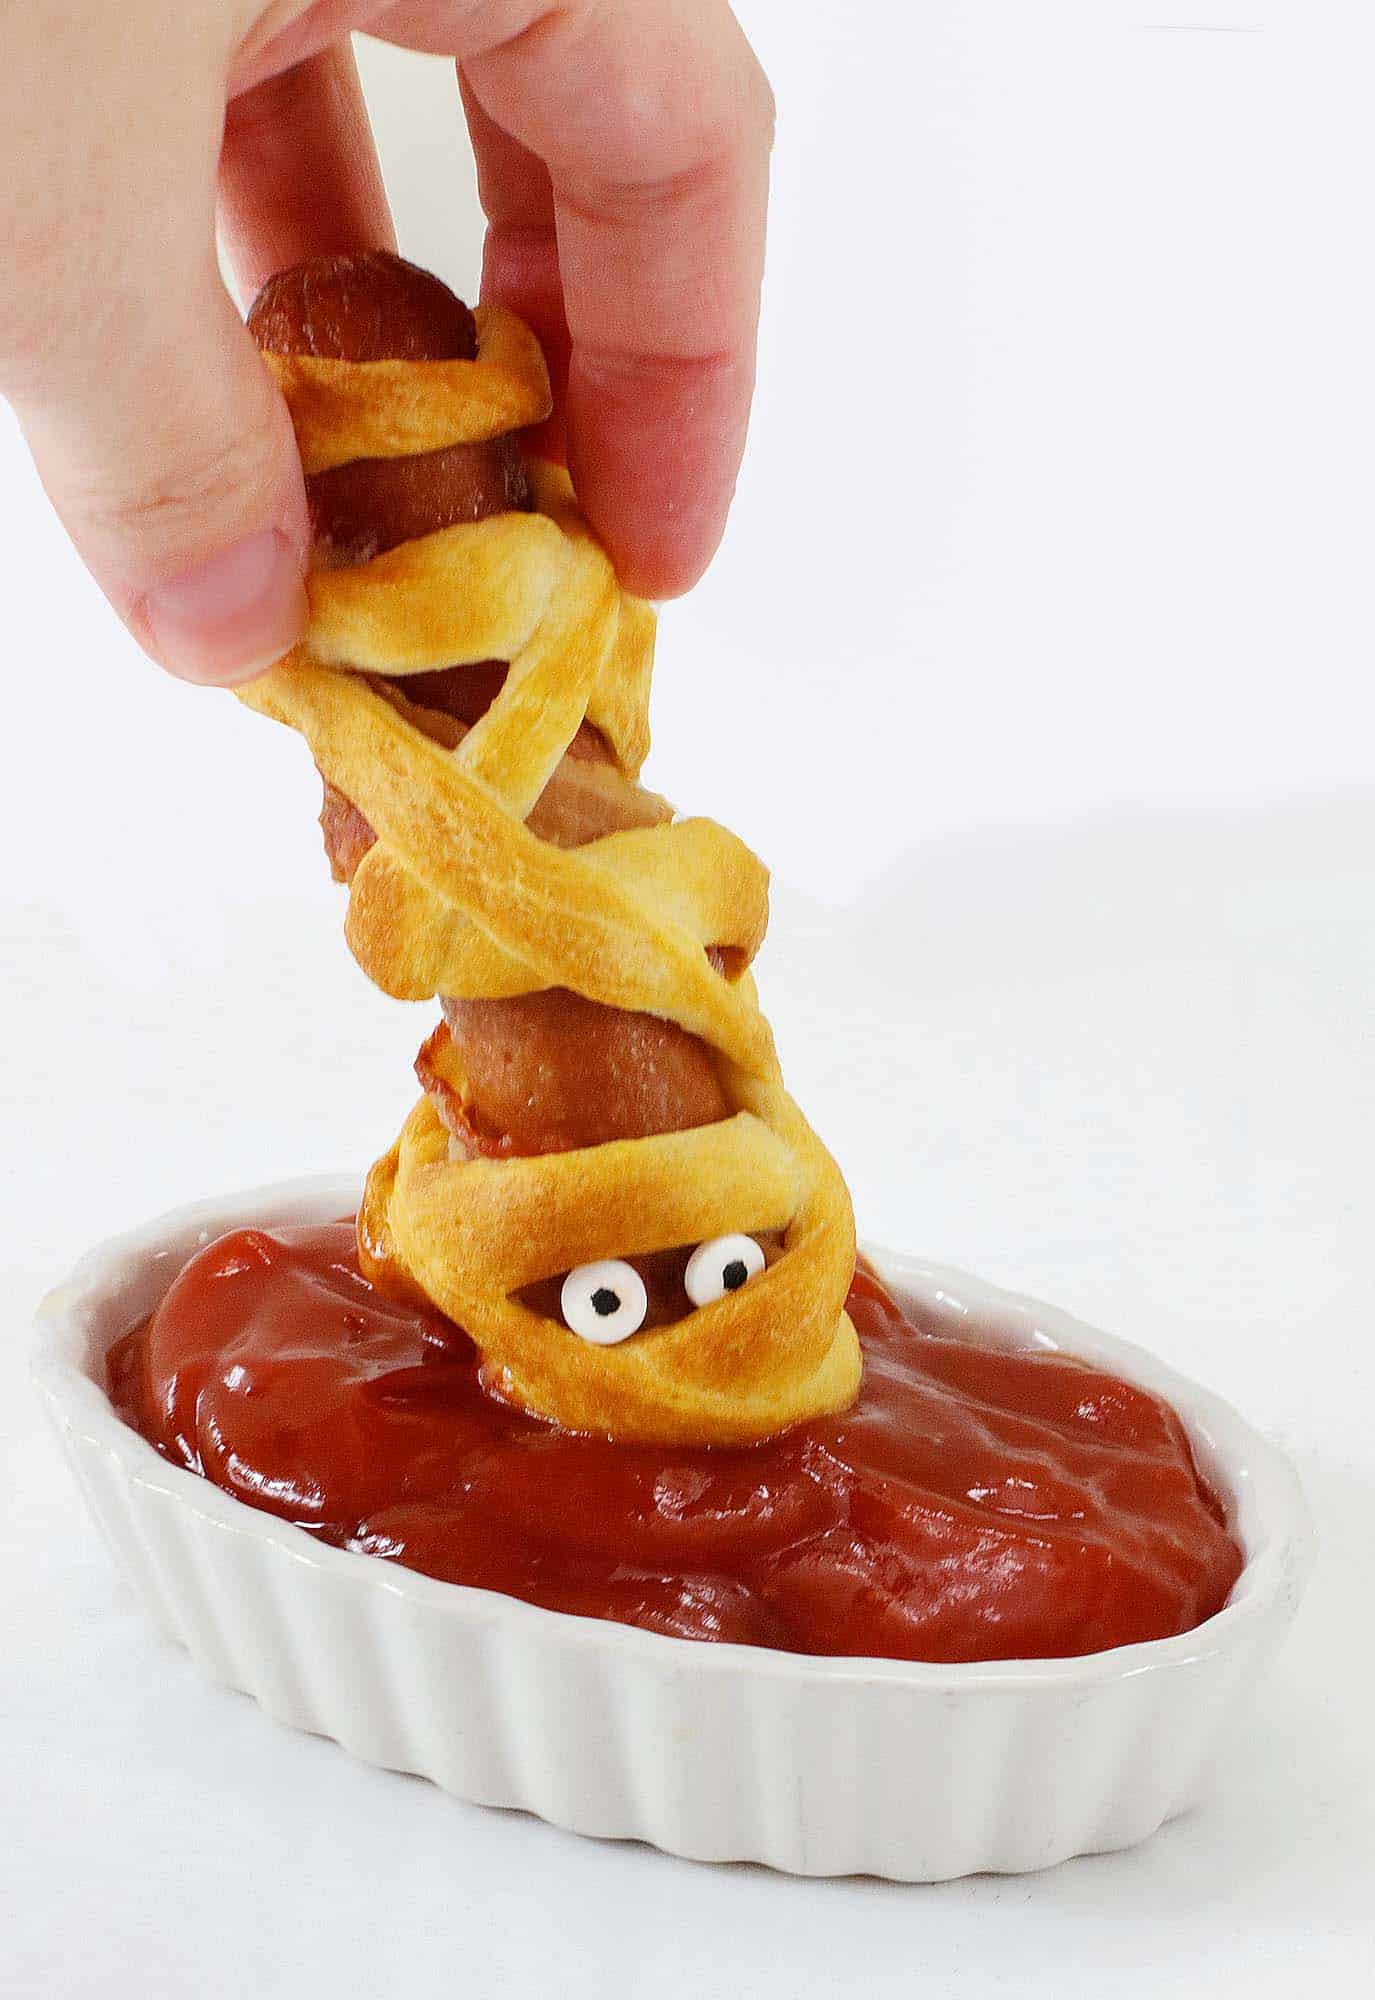 Dipping a mummy hot dog in ketchup